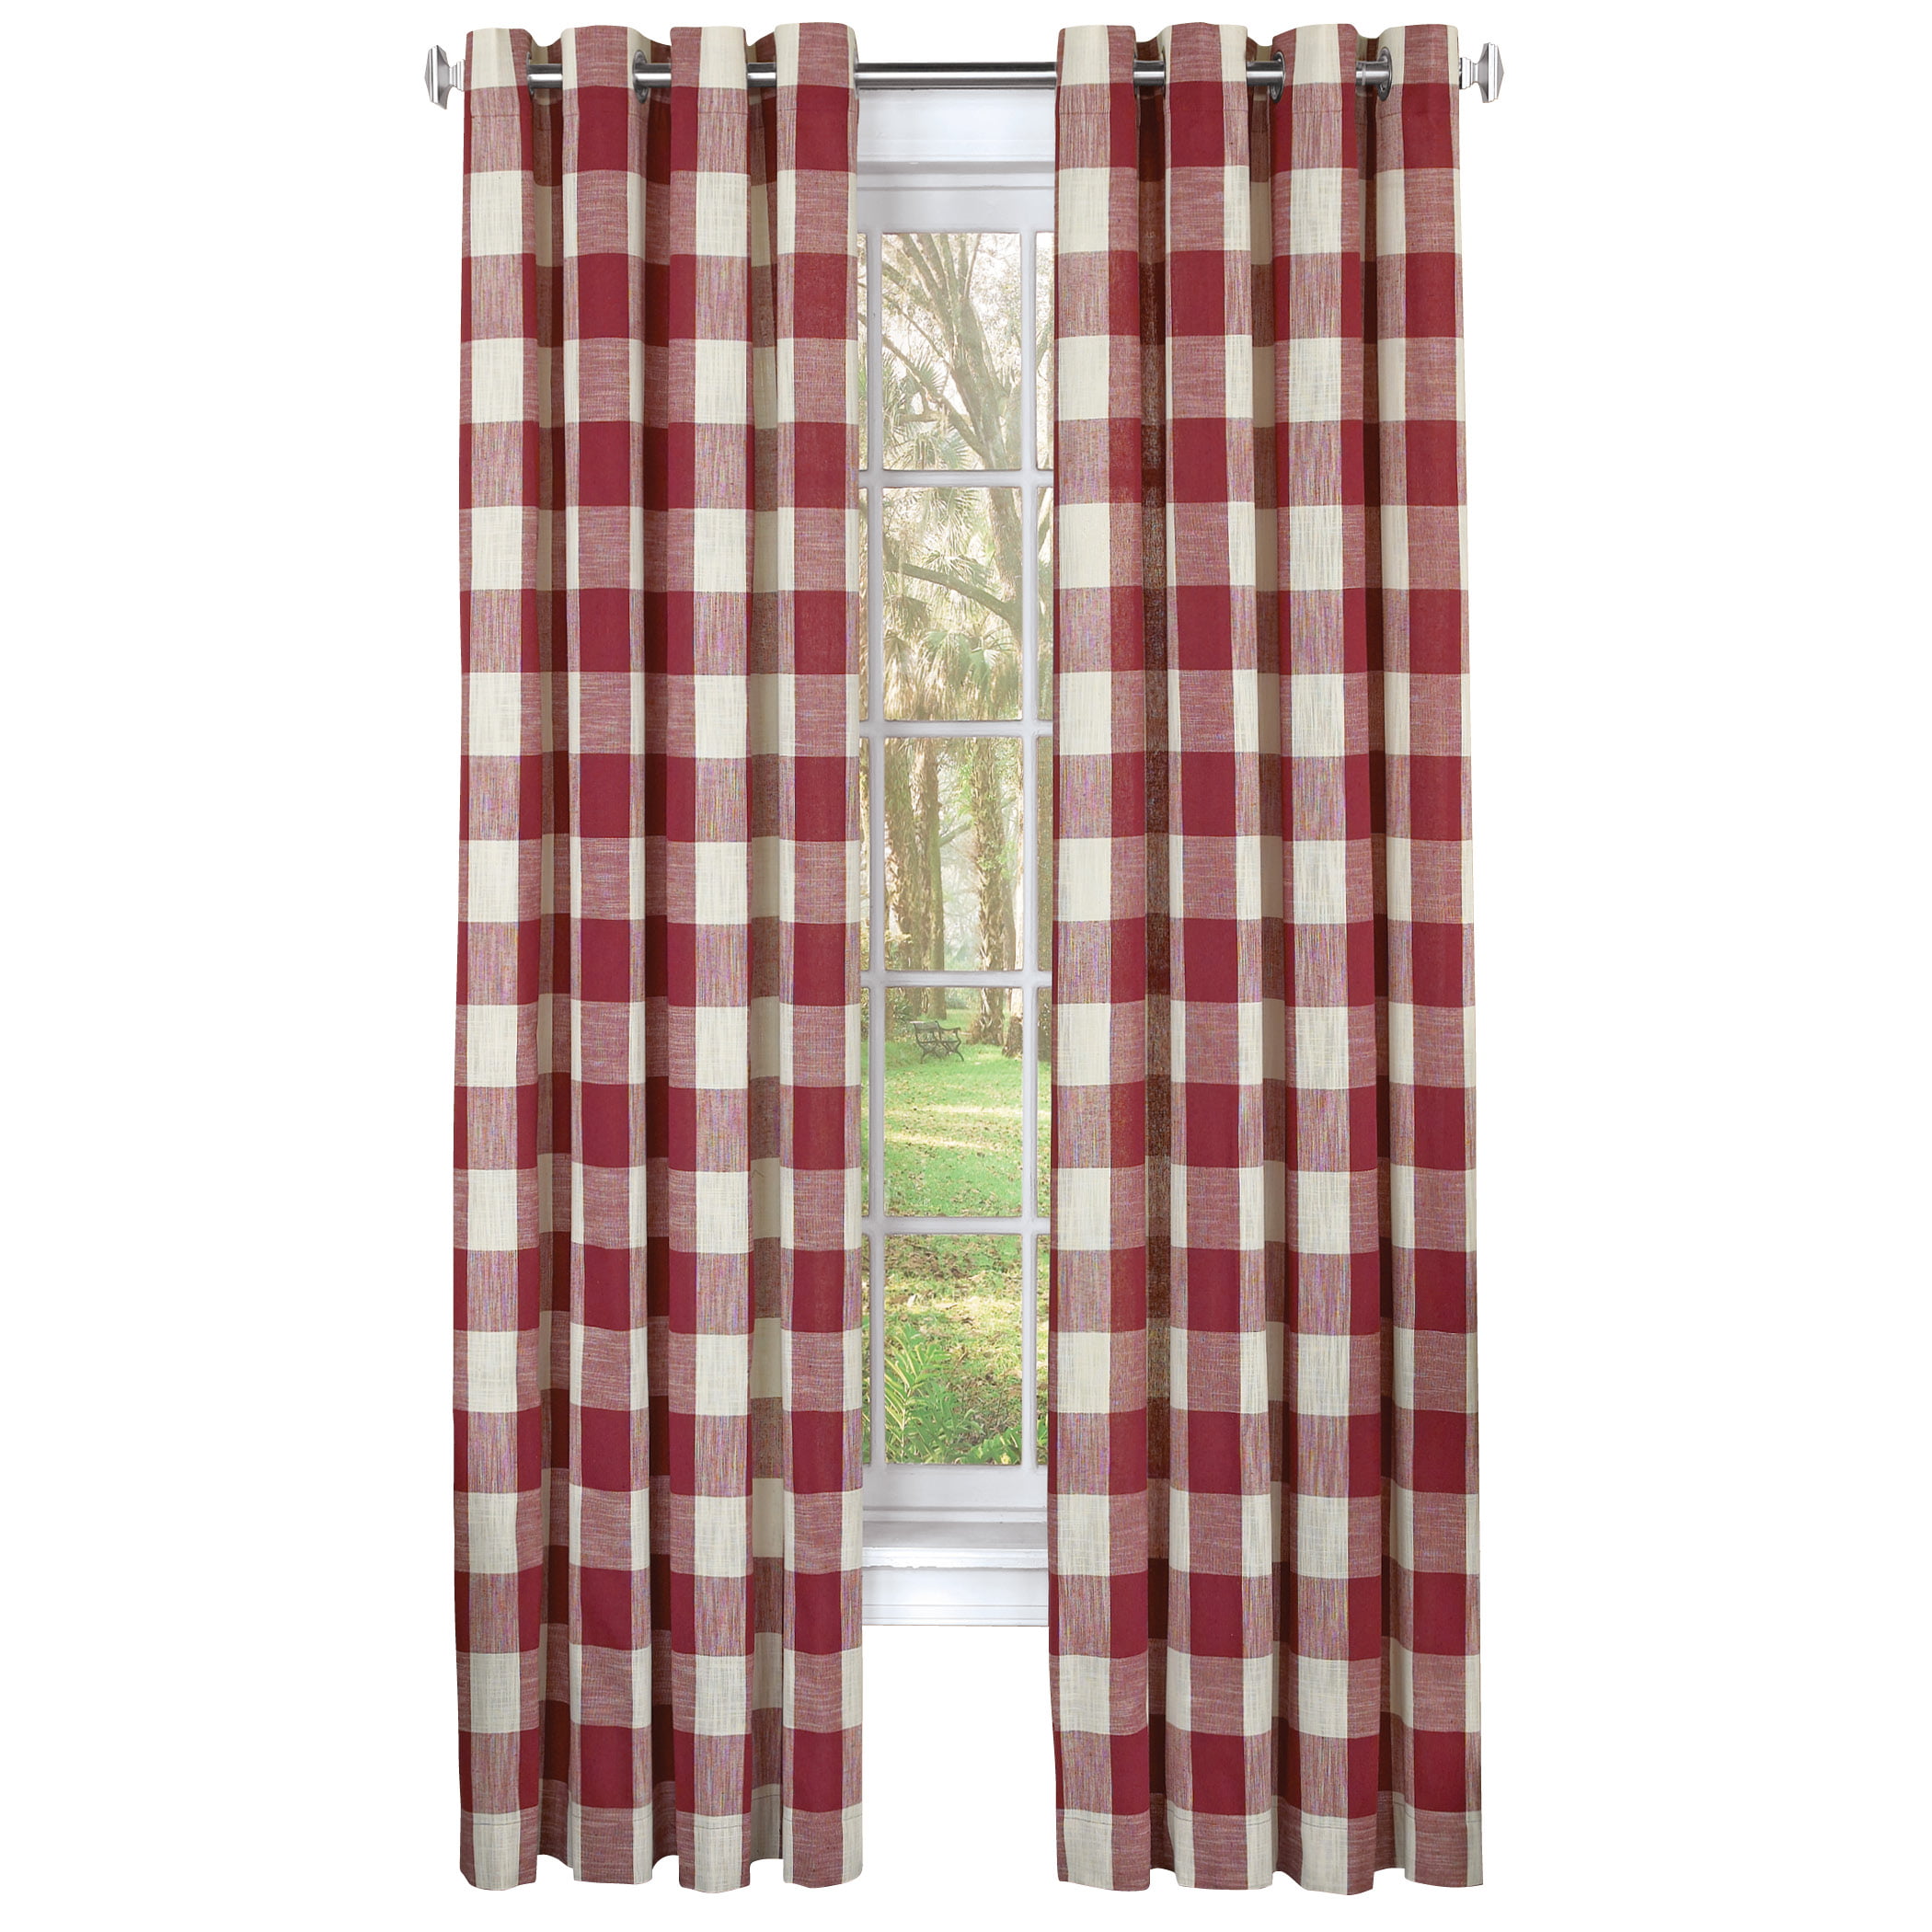 Next Pair Curtains 53 X 54 Tab Top Pink Floral Gingham Check 